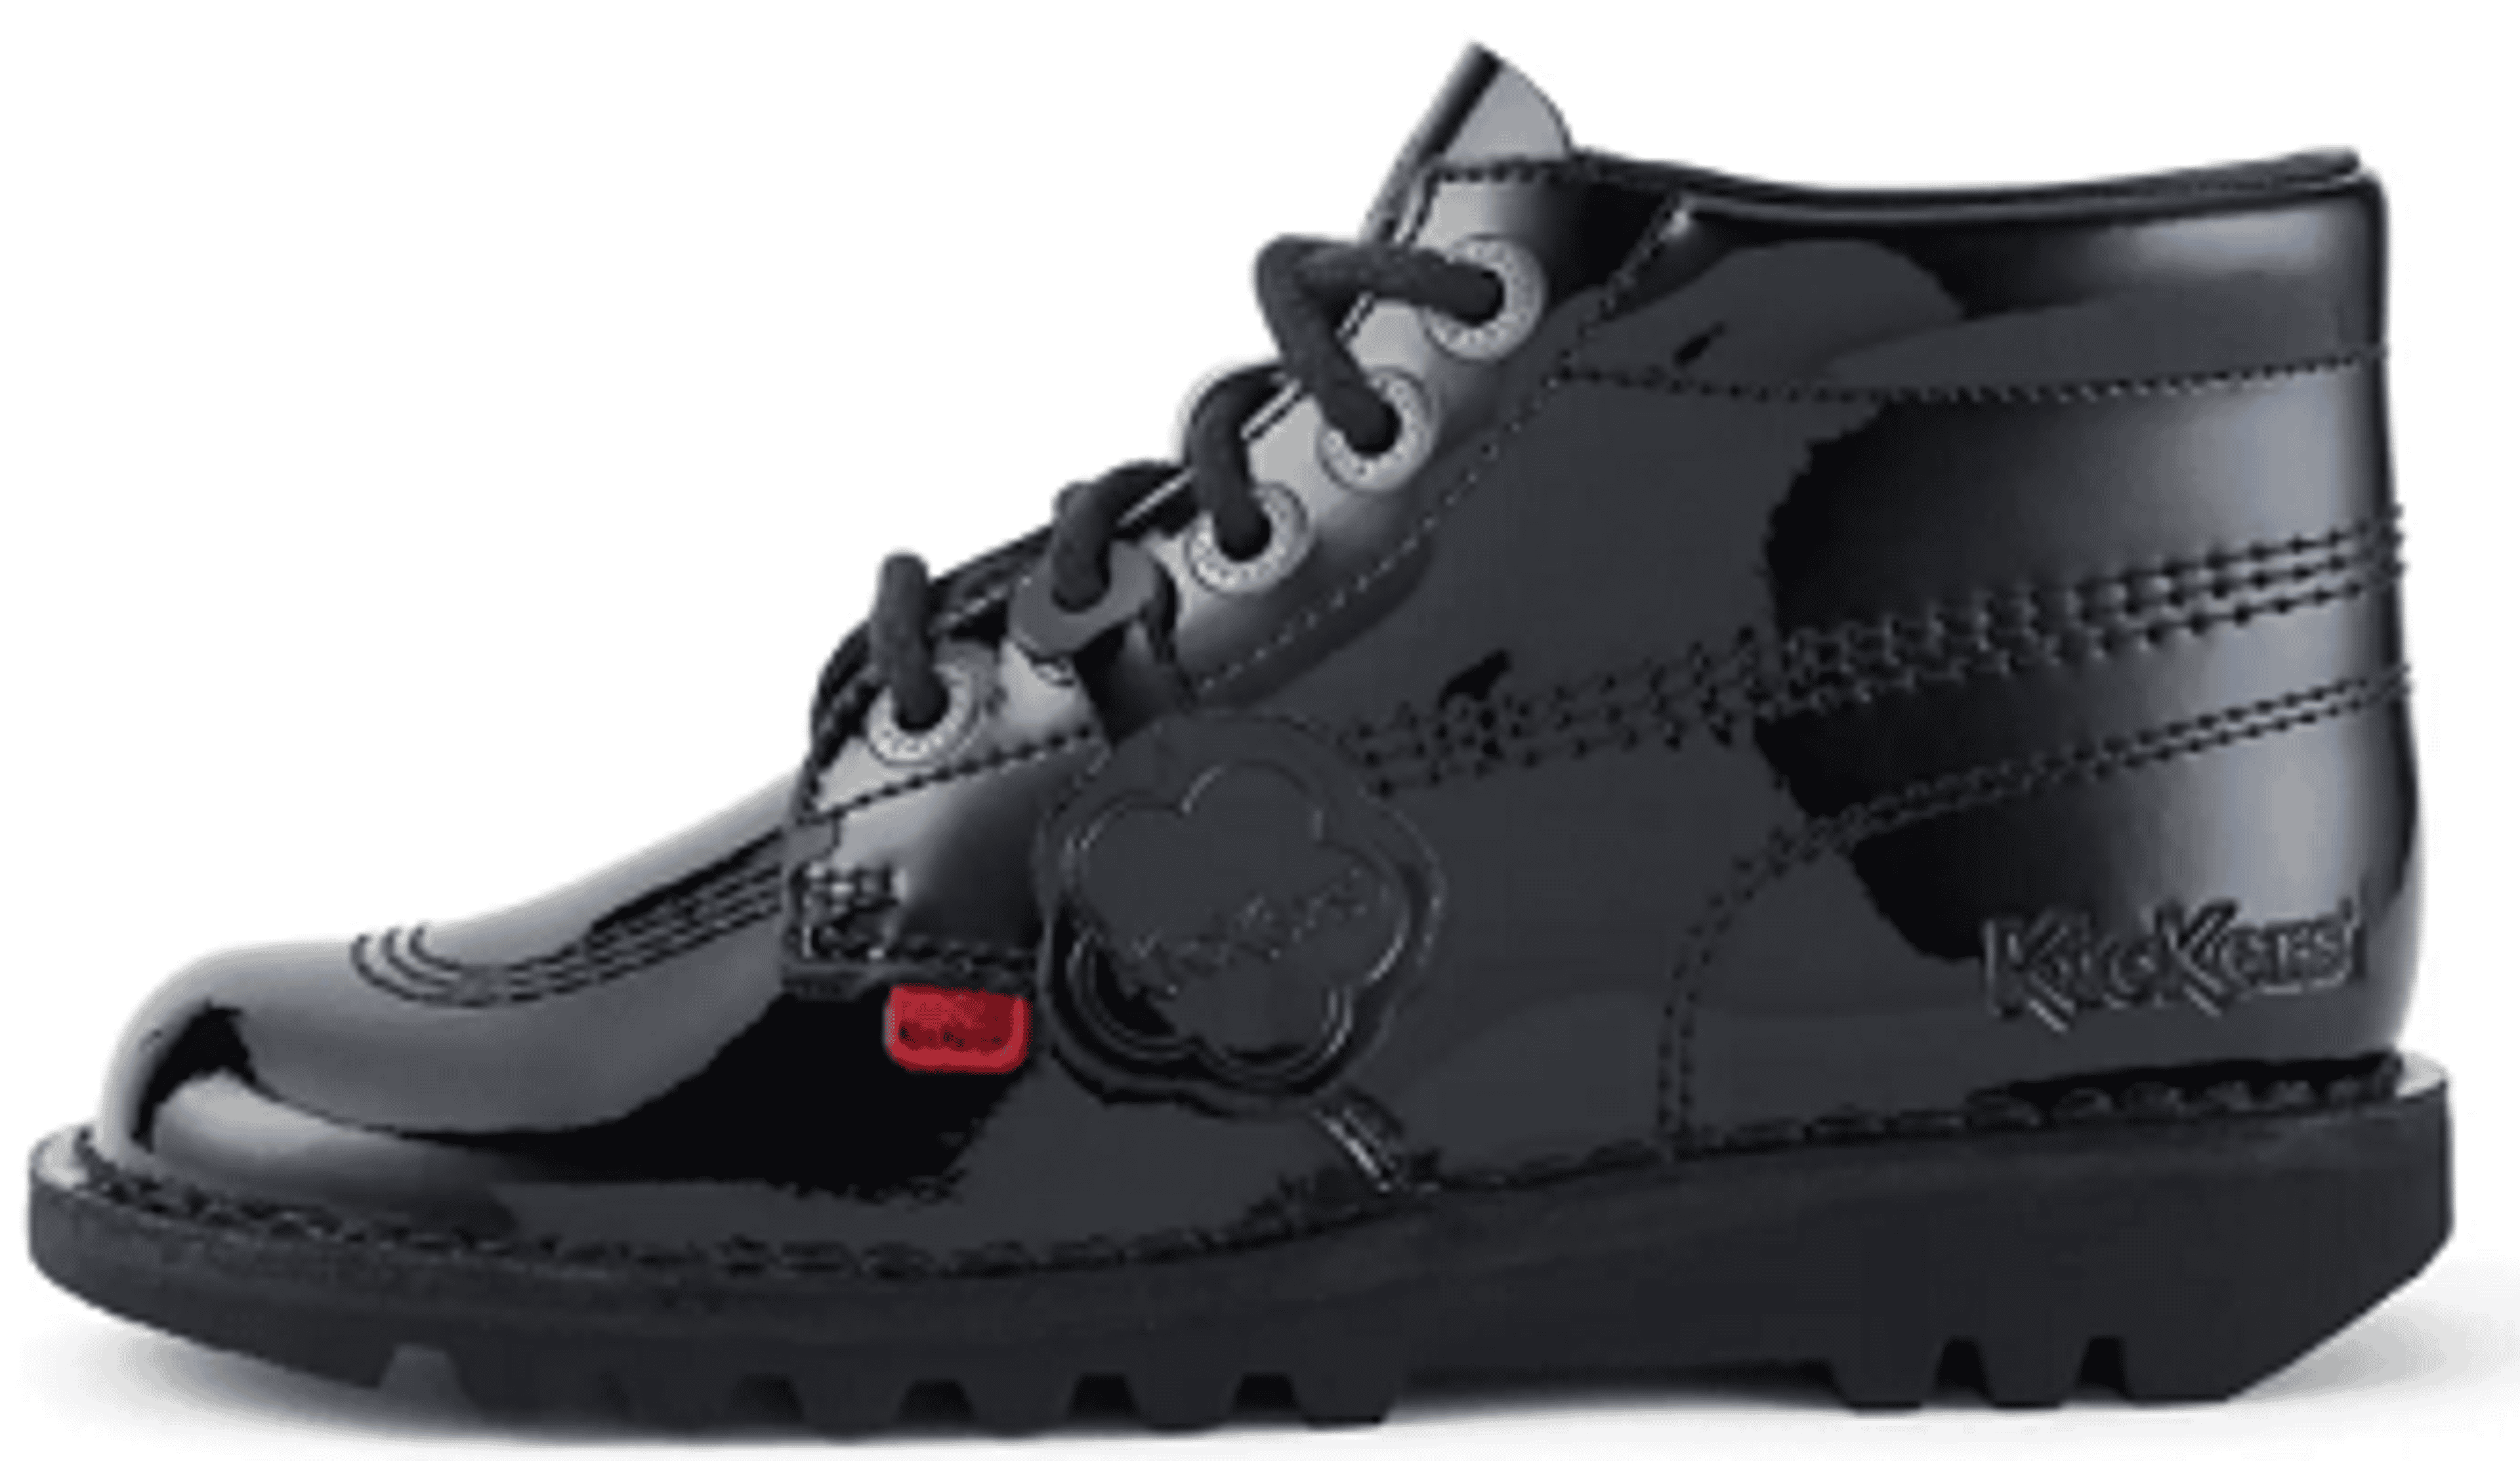  The Kick Hi Teen school shoe in black available at Kickers 